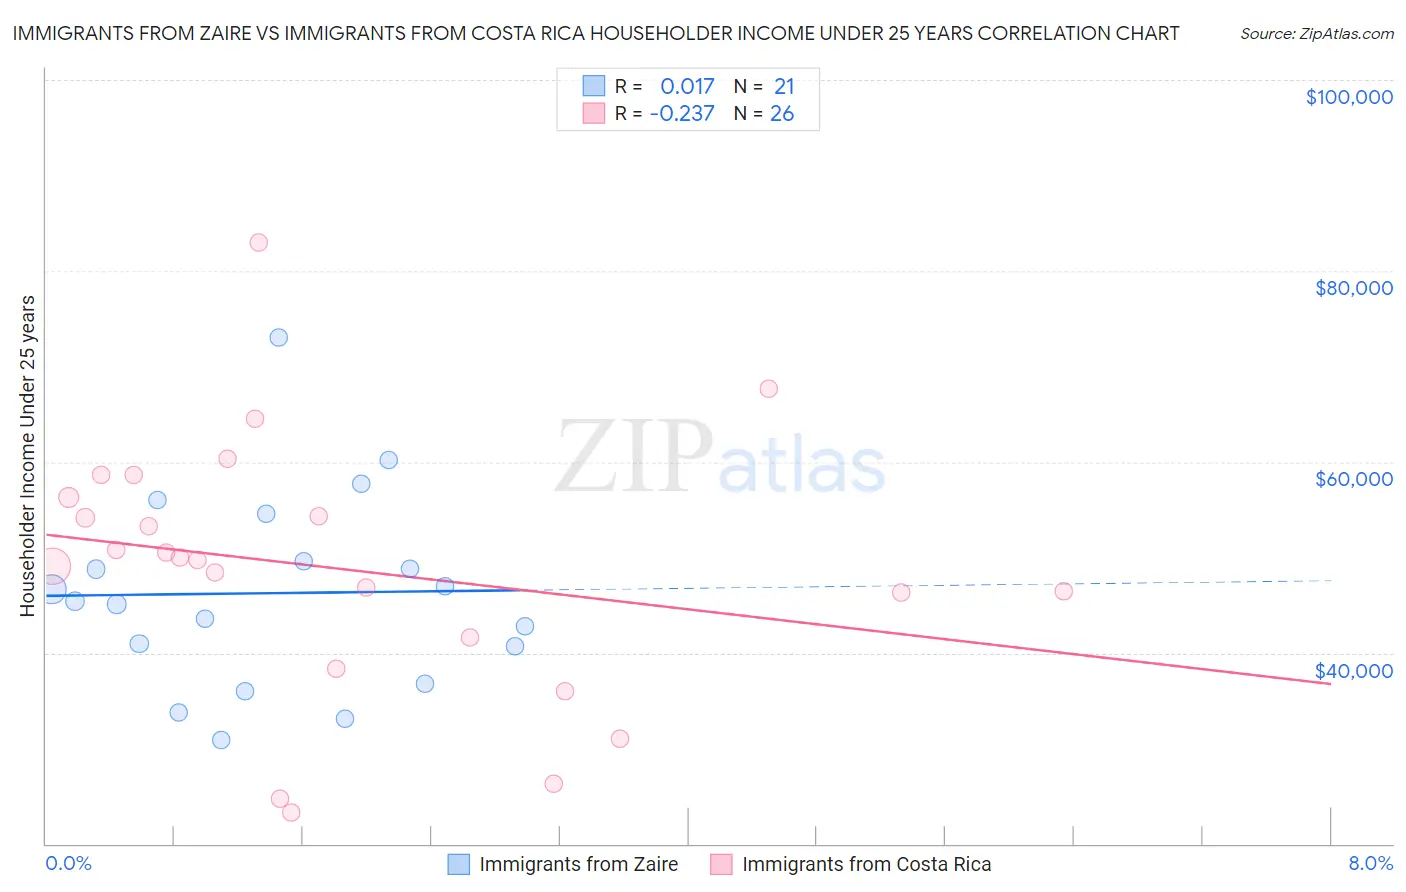 Immigrants from Zaire vs Immigrants from Costa Rica Householder Income Under 25 years